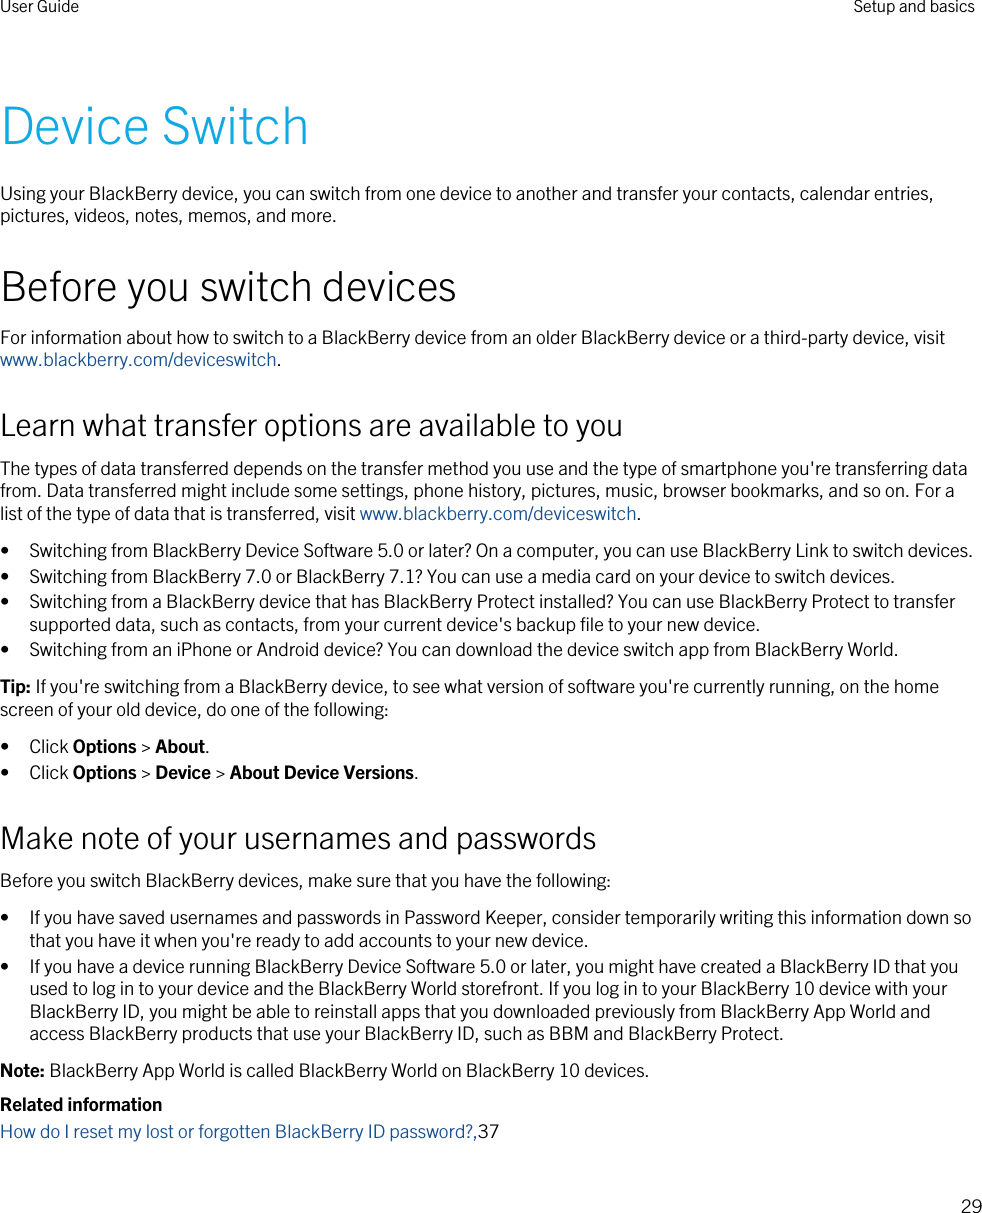 Device SwitchUsing your BlackBerry device, you can switch from one device to another and transfer your contacts, calendar entries, pictures, videos, notes, memos, and more.Before you switch devicesFor information about how to switch to a BlackBerry device from an older BlackBerry device or a third-party device, visit www.blackberry.com/deviceswitch.Learn what transfer options are available to youThe types of data transferred depends on the transfer method you use and the type of smartphone you&apos;re transferring data from. Data transferred might include some settings, phone history, pictures, music, browser bookmarks, and so on. For a list of the type of data that is transferred, visit www.blackberry.com/deviceswitch.• Switching from BlackBerry Device Software 5.0 or later? On a computer, you can use BlackBerry Link to switch devices.• Switching from BlackBerry 7.0 or BlackBerry 7.1? You can use a media card on your device to switch devices.• Switching from a BlackBerry device that has BlackBerry Protect installed? You can use BlackBerry Protect to transfer supported data, such as contacts, from your current device&apos;s backup file to your new device.• Switching from an iPhone or Android device? You can download the device switch app from BlackBerry World.Tip: If you&apos;re switching from a BlackBerry device, to see what version of software you&apos;re currently running, on the home screen of your old device, do one of the following:• Click Options &gt; About.• Click Options &gt; Device &gt; About Device Versions.Make note of your usernames and passwordsBefore you switch BlackBerry devices, make sure that you have the following:• If you have saved usernames and passwords in Password Keeper, consider temporarily writing this information down so that you have it when you&apos;re ready to add accounts to your new device.• If you have a device running BlackBerry Device Software 5.0 or later, you might have created a BlackBerry ID that you used to log in to your device and the BlackBerry World storefront. If you log in to your BlackBerry 10 device with your BlackBerry ID, you might be able to reinstall apps that you downloaded previously from BlackBerry App World and access BlackBerry products that use your BlackBerry ID, such as BBM and BlackBerry Protect.Note: BlackBerry App World is called BlackBerry World on BlackBerry 10 devices.Related informationHow do I reset my lost or forgotten BlackBerry ID password?,37User Guide Setup and basics29